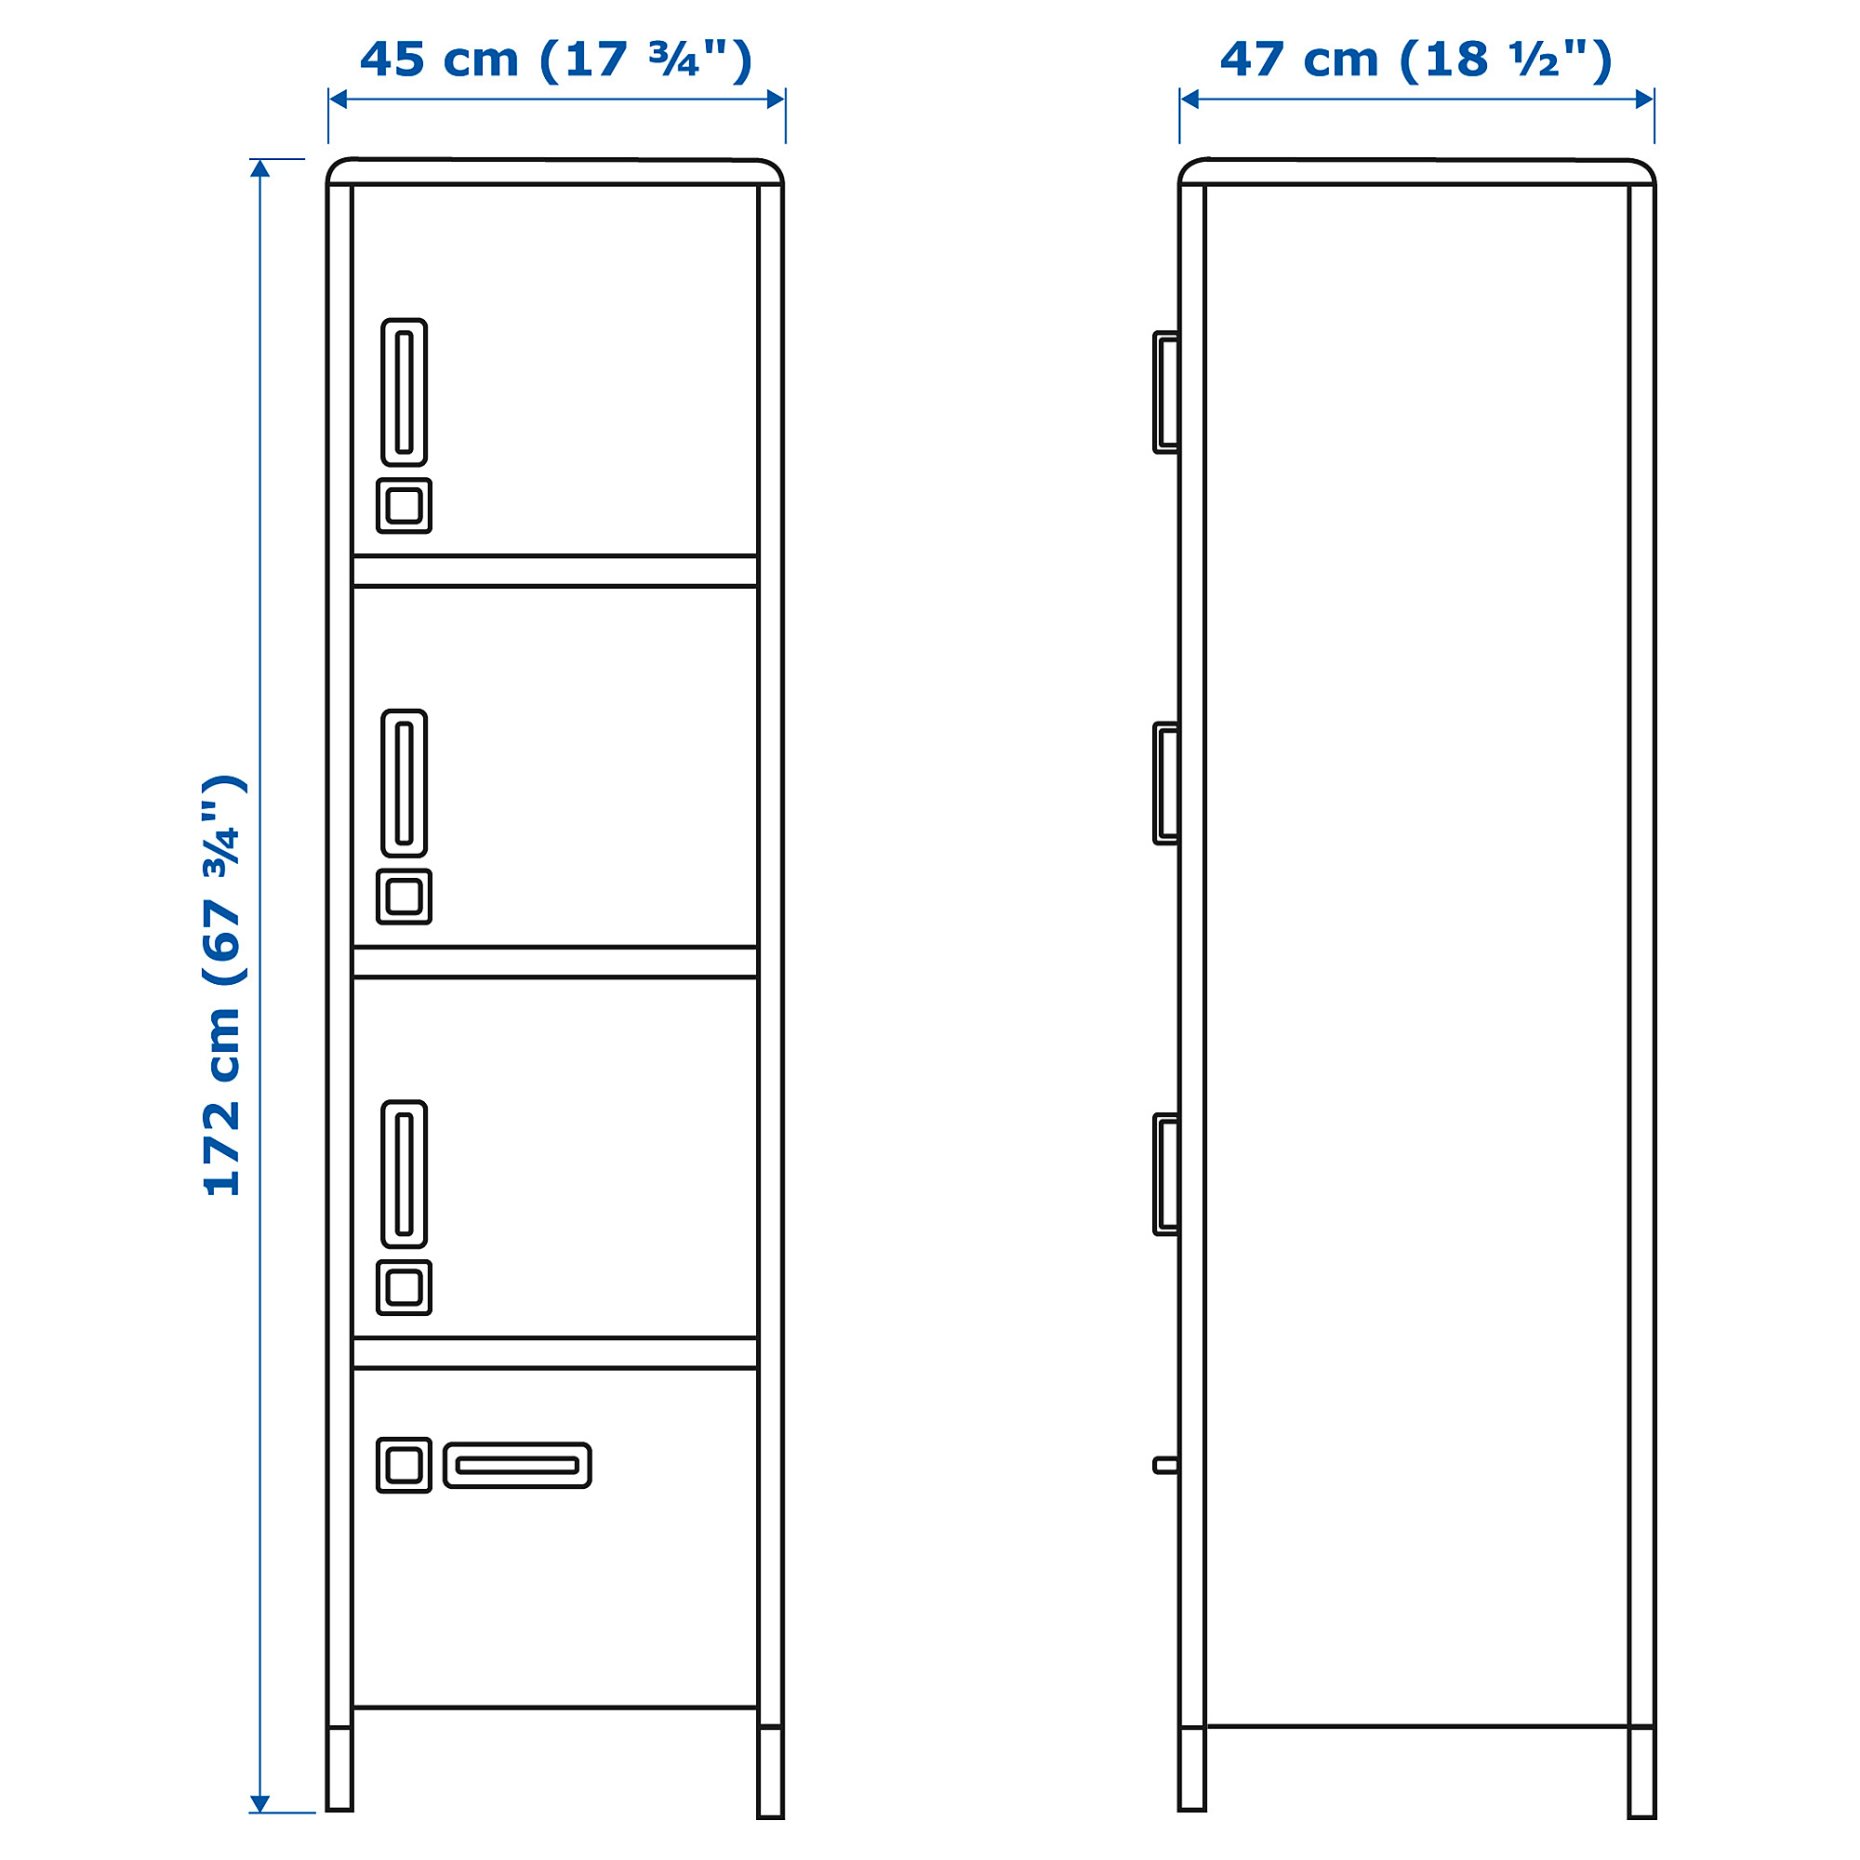 IDÅSEN, high cabinet with drawer and doors, 45x172 cm, 004.963.88